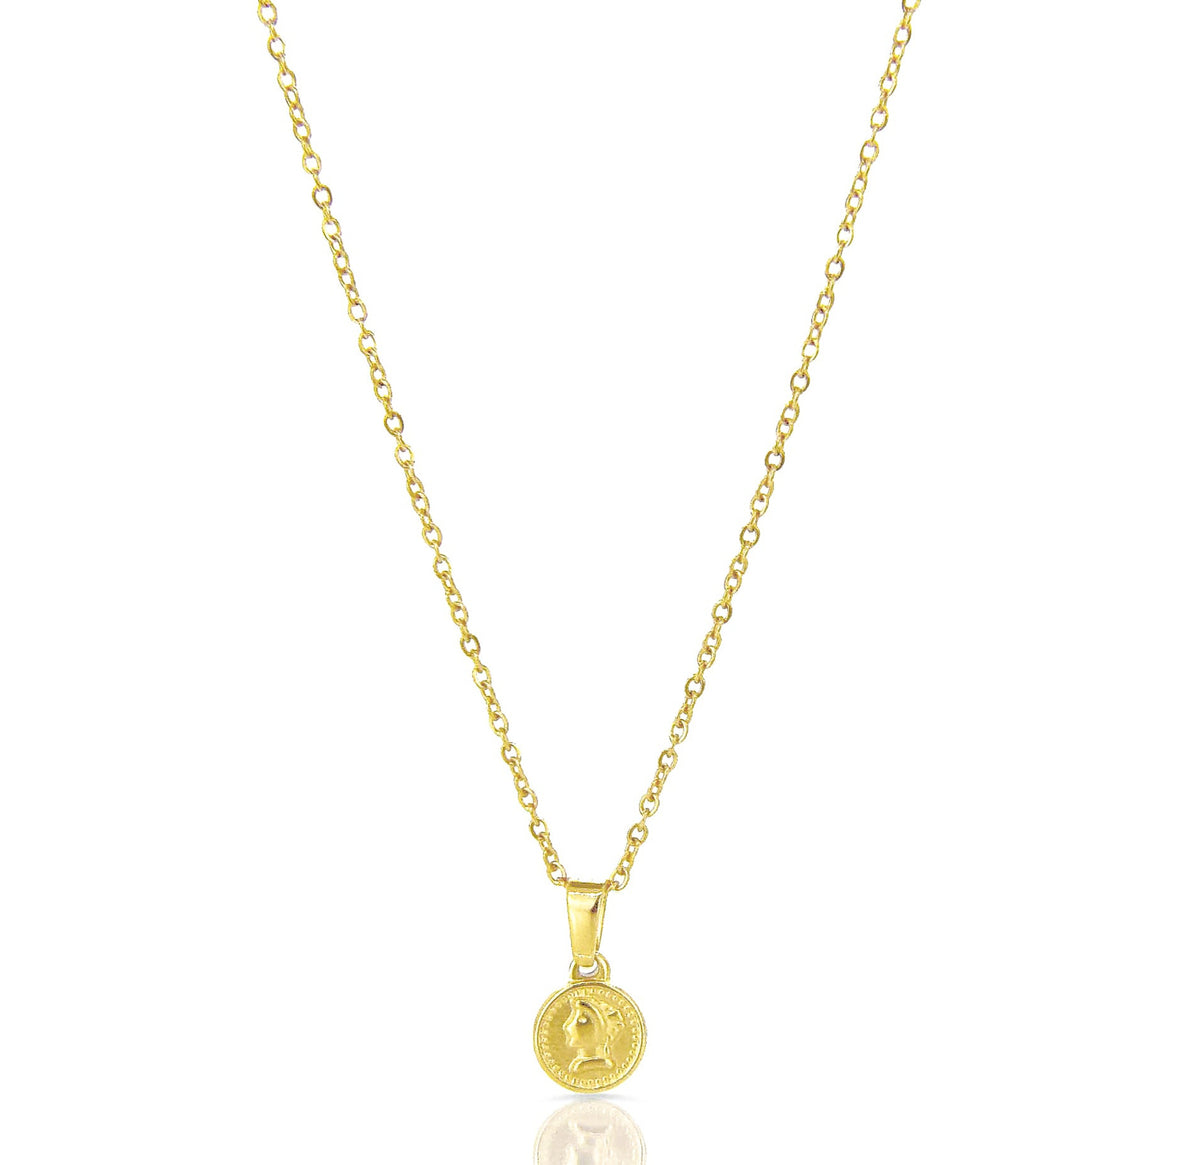 DAINTY GOLD COIN NECKLACE WATERPROOF JEWELRY